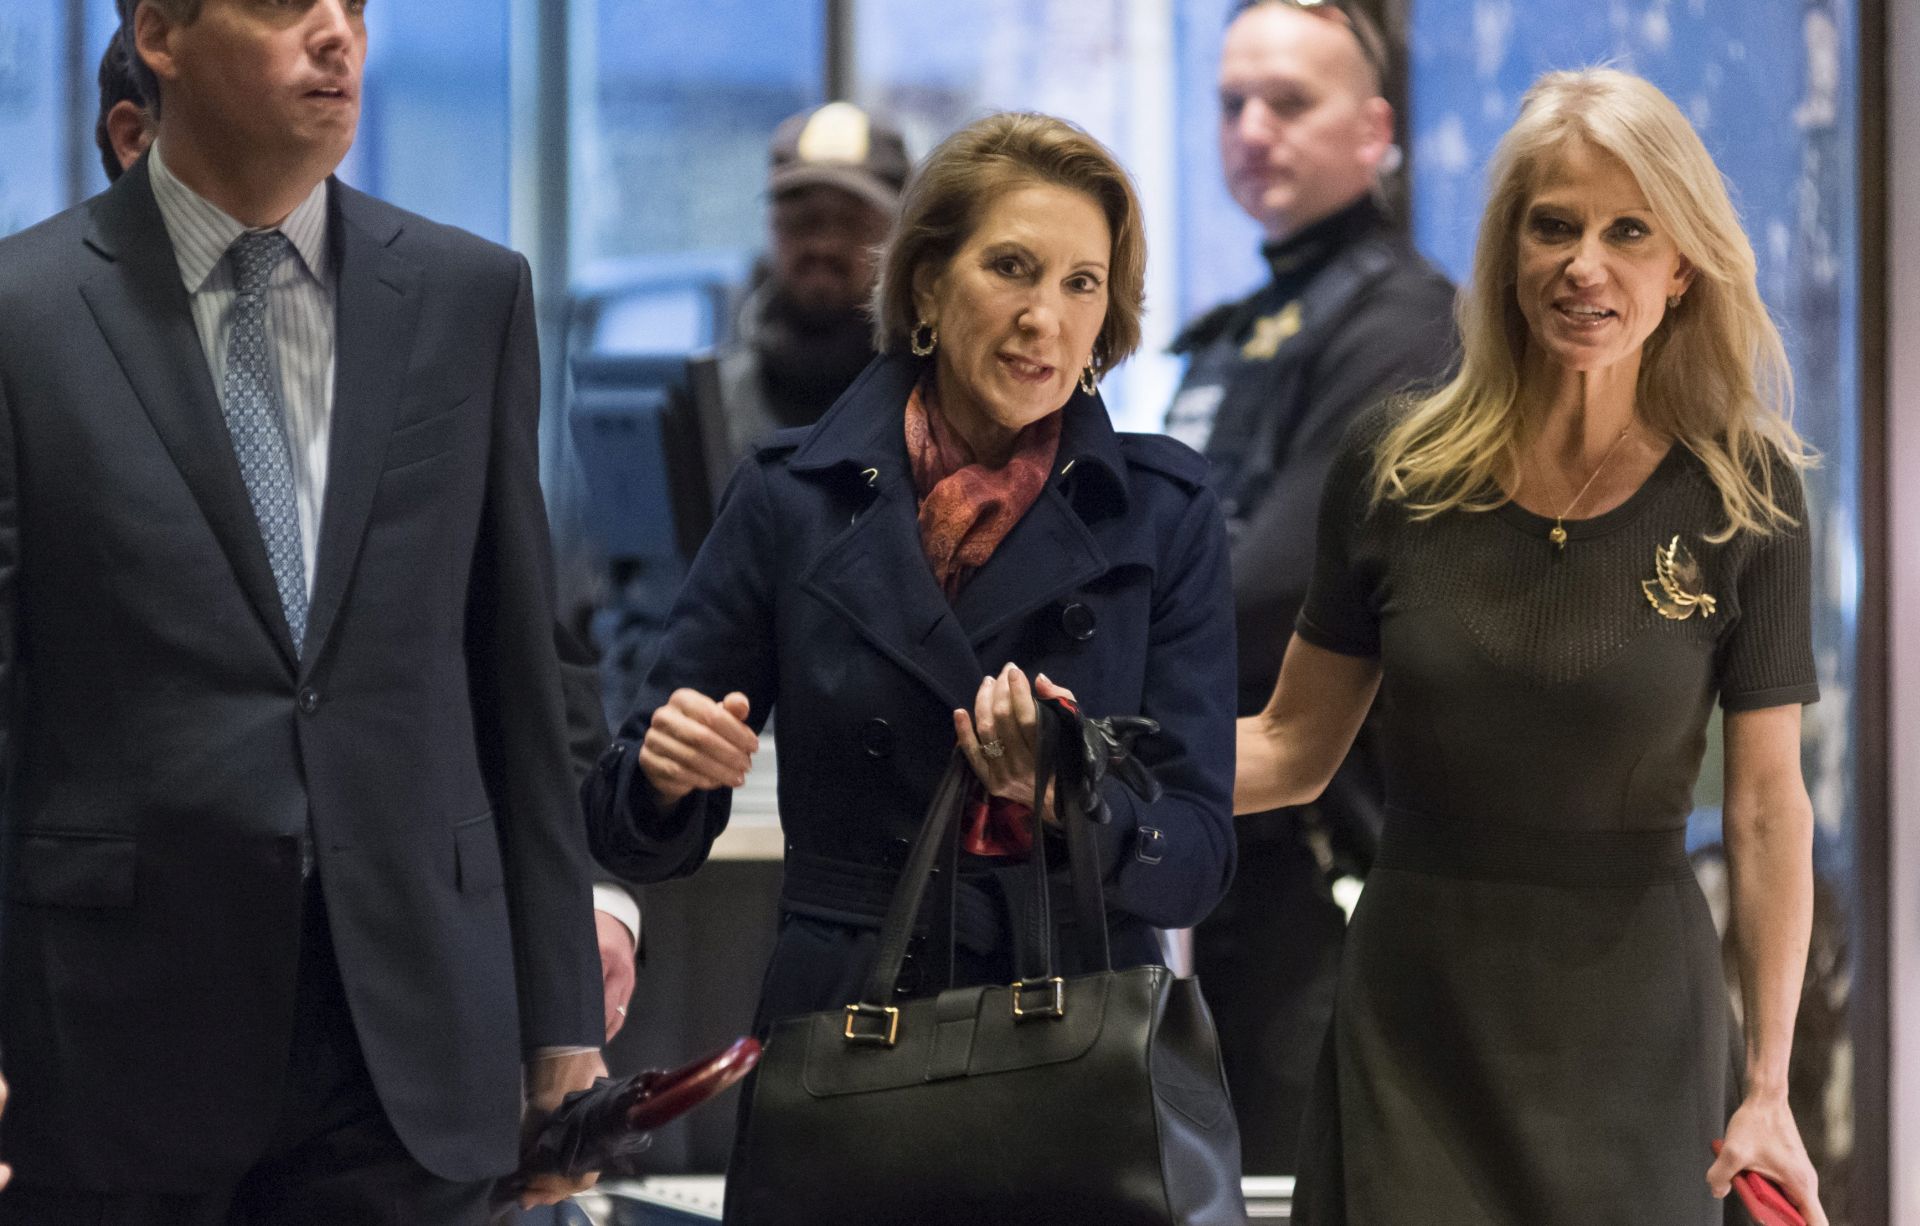 epa05672651 Former Republican presidential primary candidate Carly Fiorina (C) walks with US President-elect Donald Trump campaign manager and political strategist Kellyanne Conway (R), upon her arrival at the lobby of Trump Tower in New York, USA, 12 December 2016. The US President-elect Donald Trump is holding meetings at Trump Tower as he continues to fill in key positions in his new administration.  EPA/ALBIN LOHR-JONES  /POOL